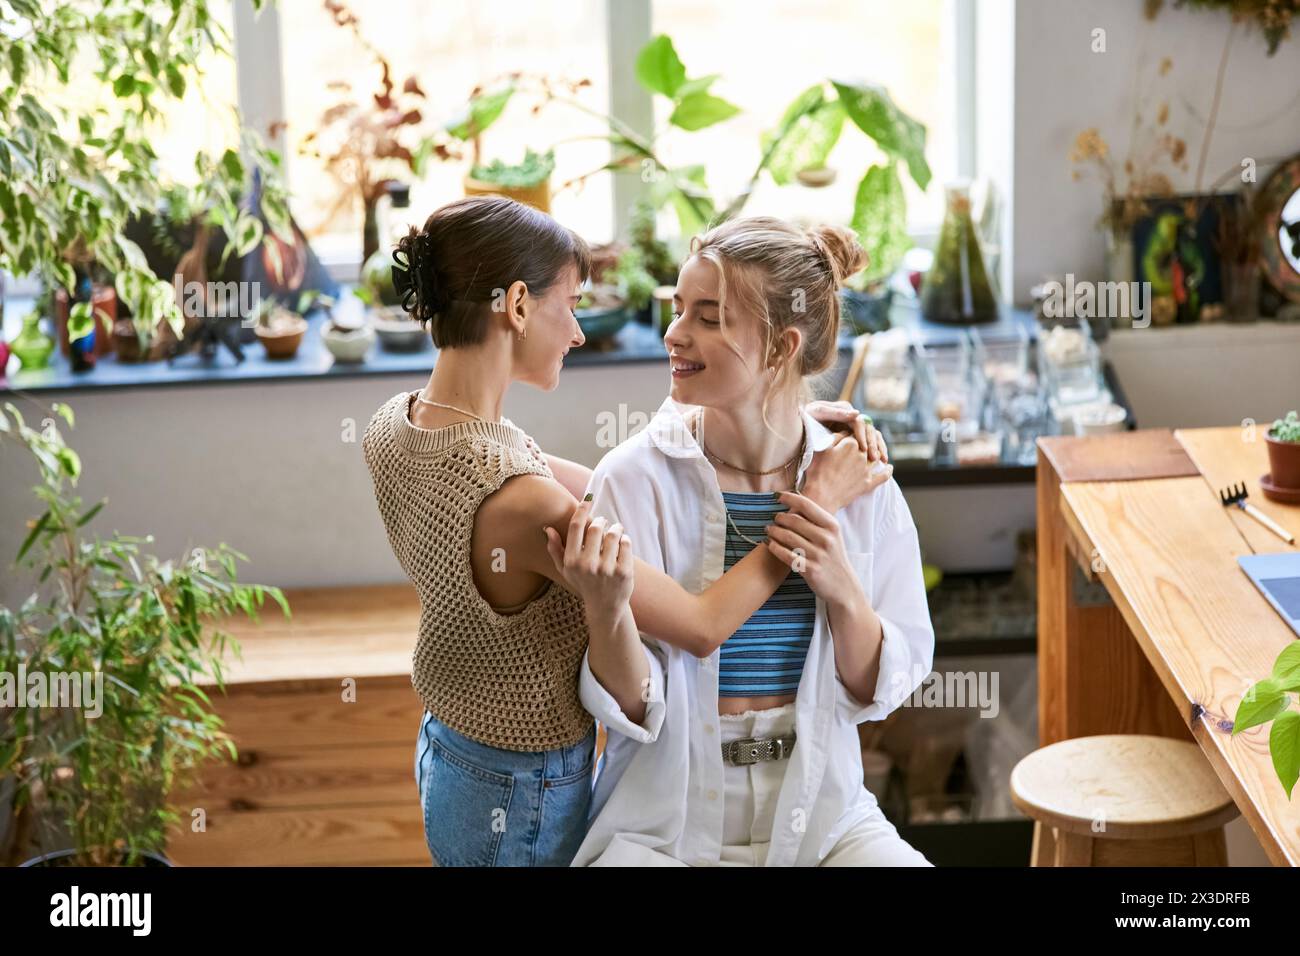 Two women, a loving lesbian couple, stand side by side in an art studio, exuding tender connection. Stock Photo